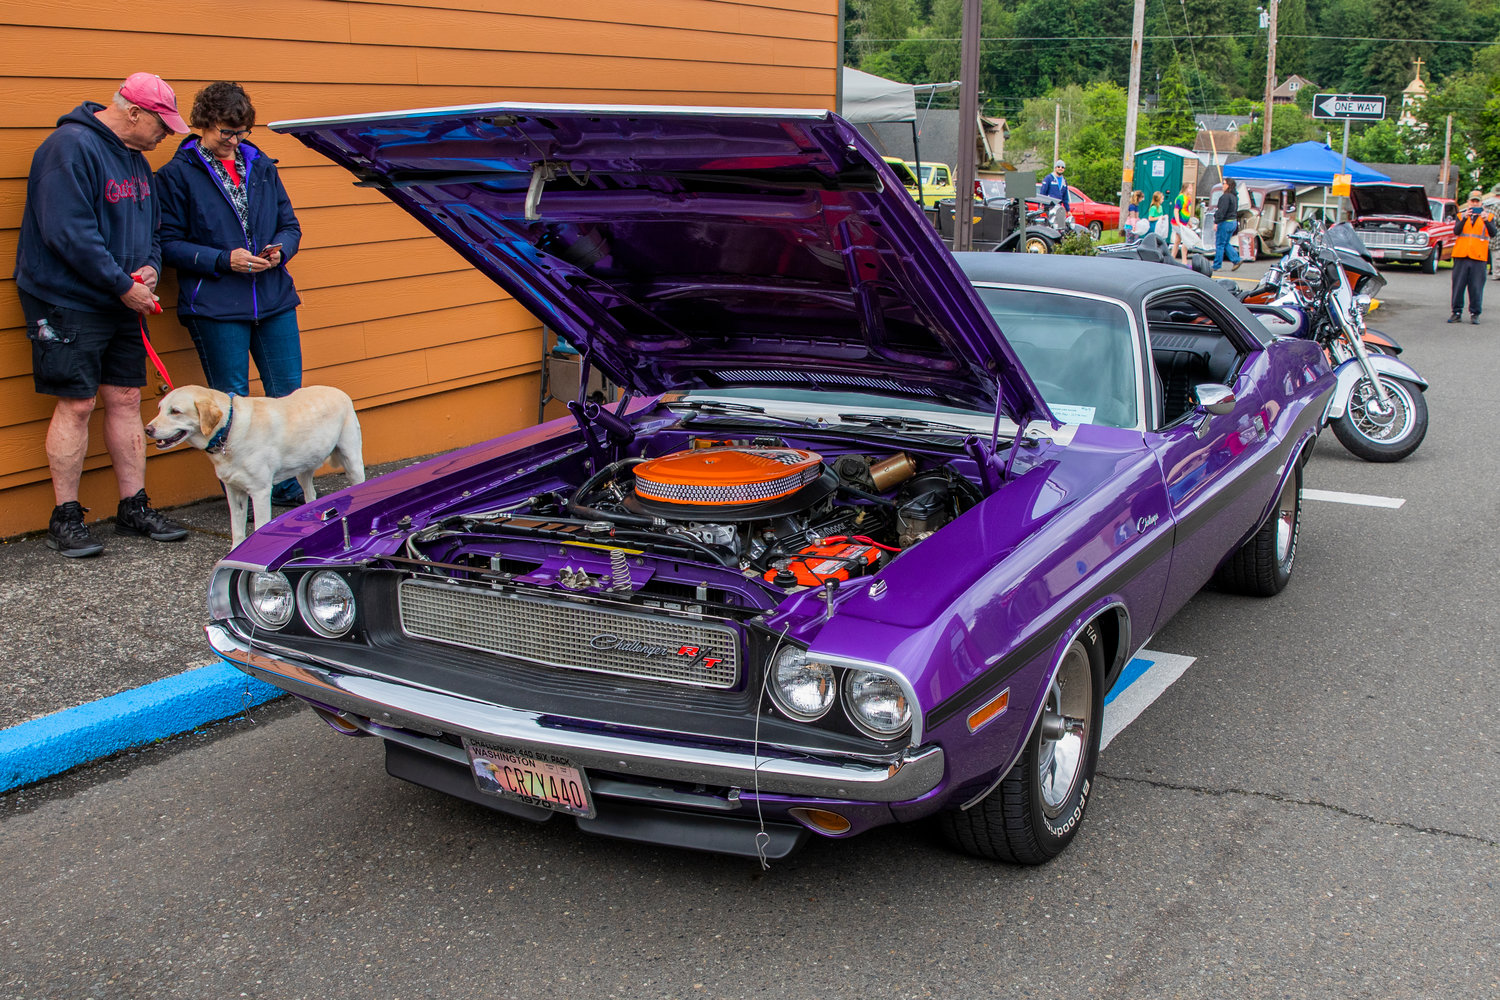 A retro Challenger sits on display during the Winlock Custom Car Show Saturday morning.